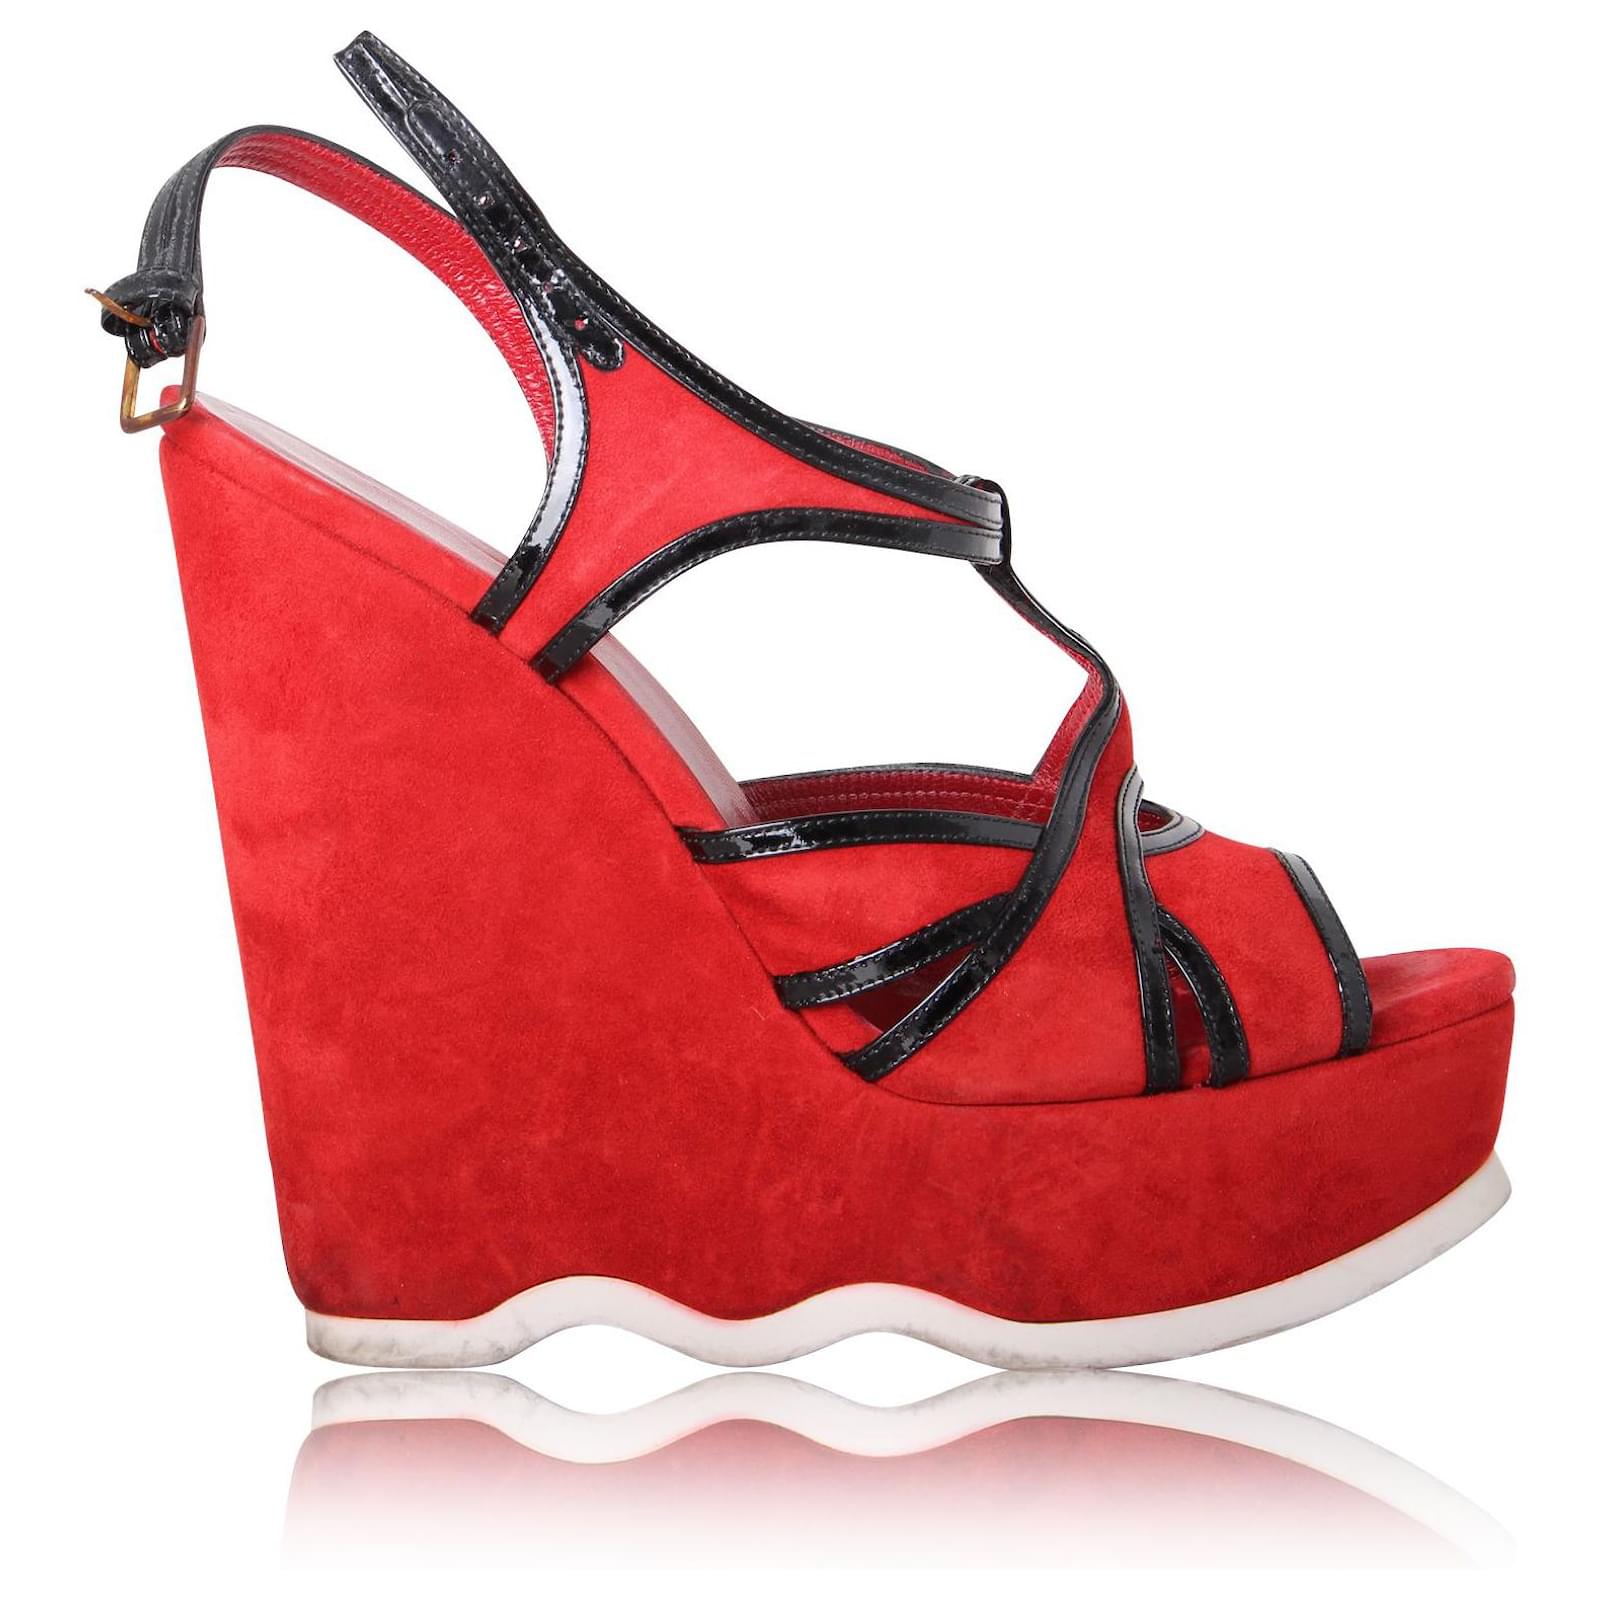 Yves Saint Laurent Riviera Slingback Wedge in Red Suede and Black ...